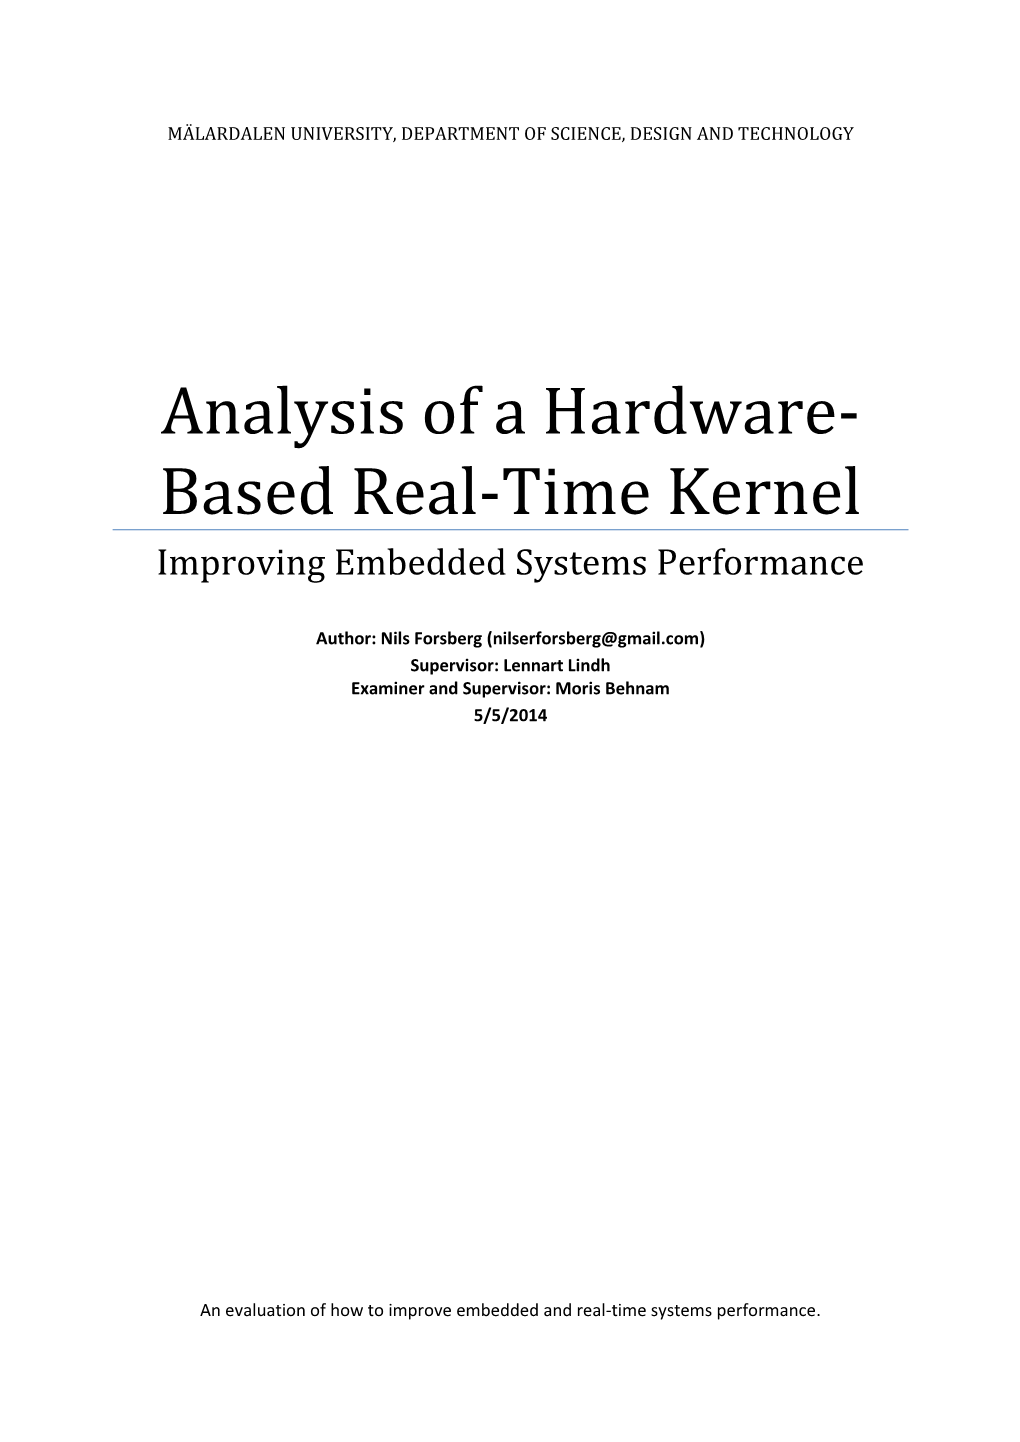 Analysis of a Hardware-Based Real-Time Kernel